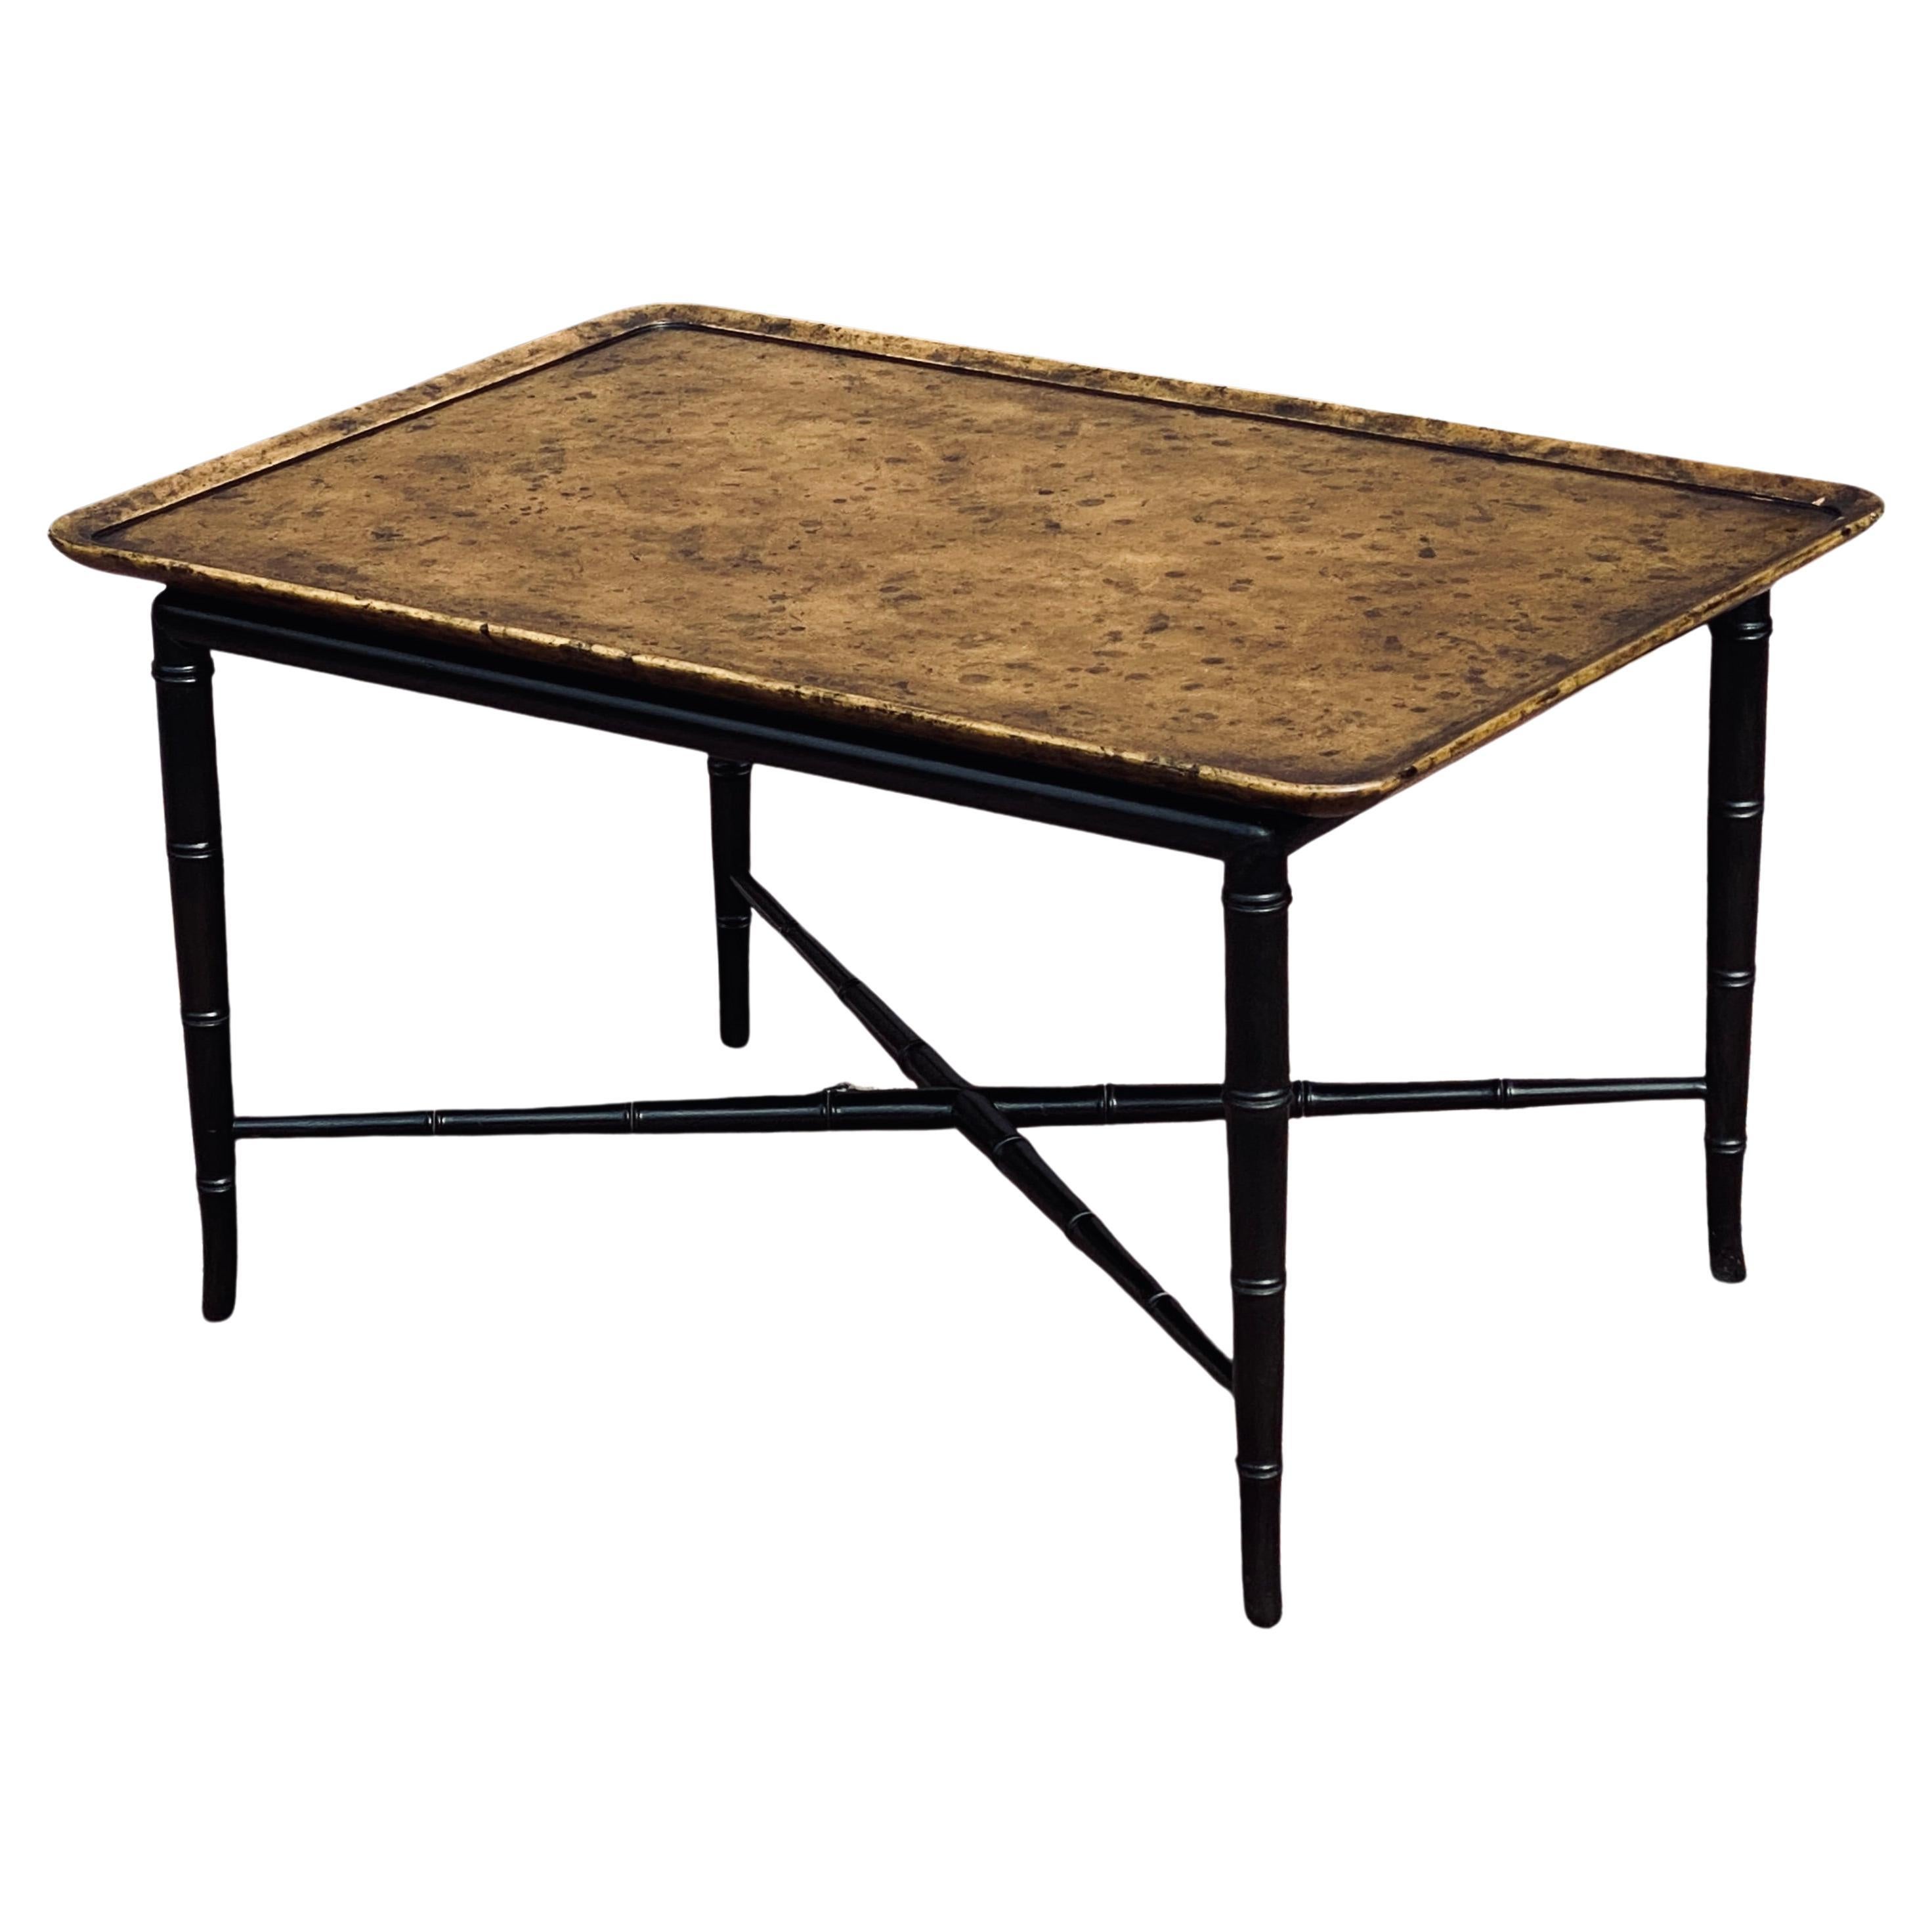 Kittinger Faux Bamboo Tortoise Shell Coffee Table For Sale